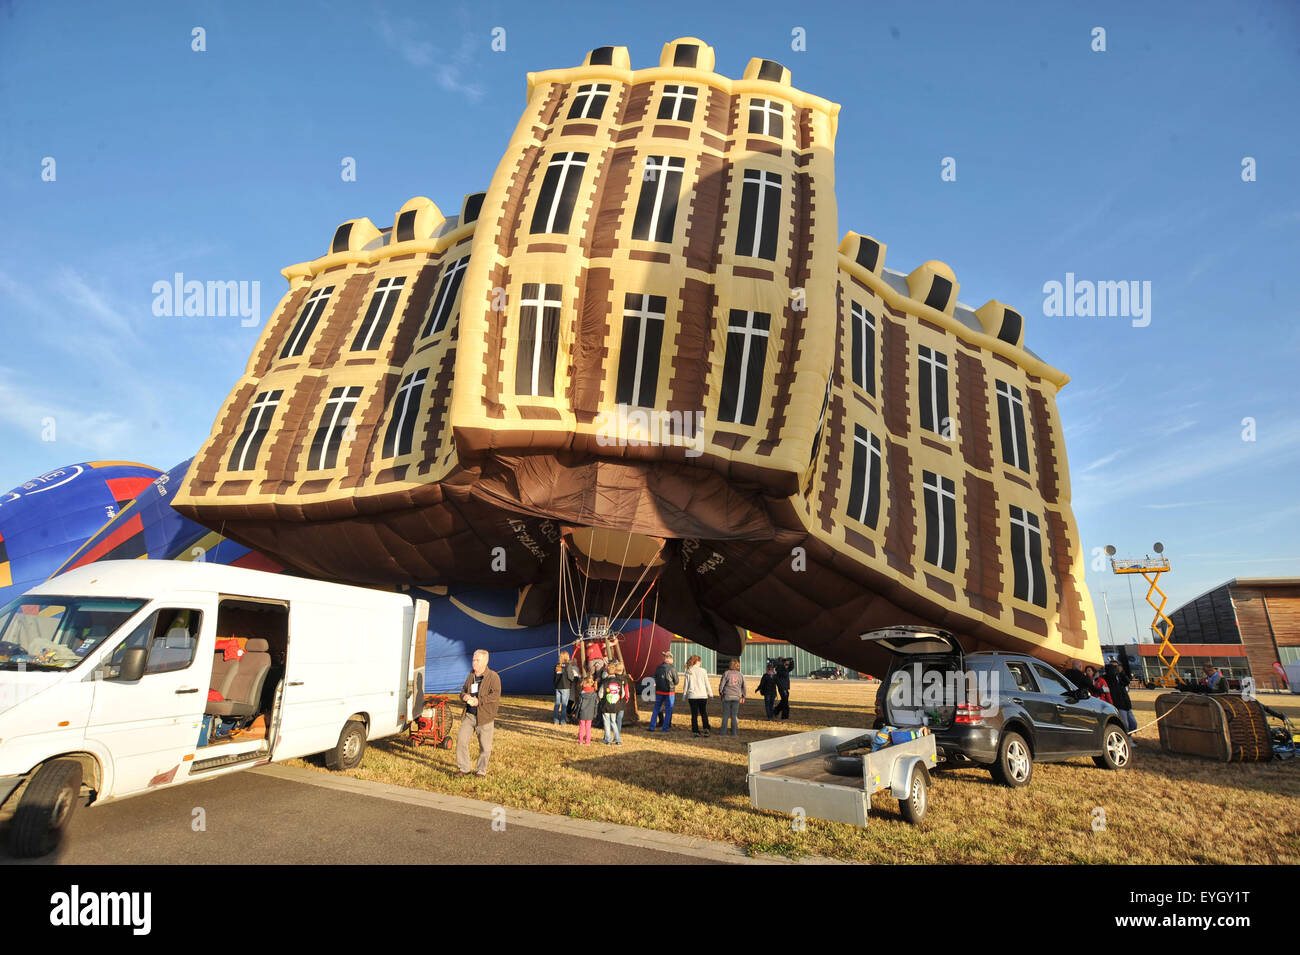 Chambley Bussieres, France. 26th July, 2015. Hot Air balloon presentation. A Balloon made to reflect a building leaves the ground © Action Plus Sports/Alamy Live News Stock Photo